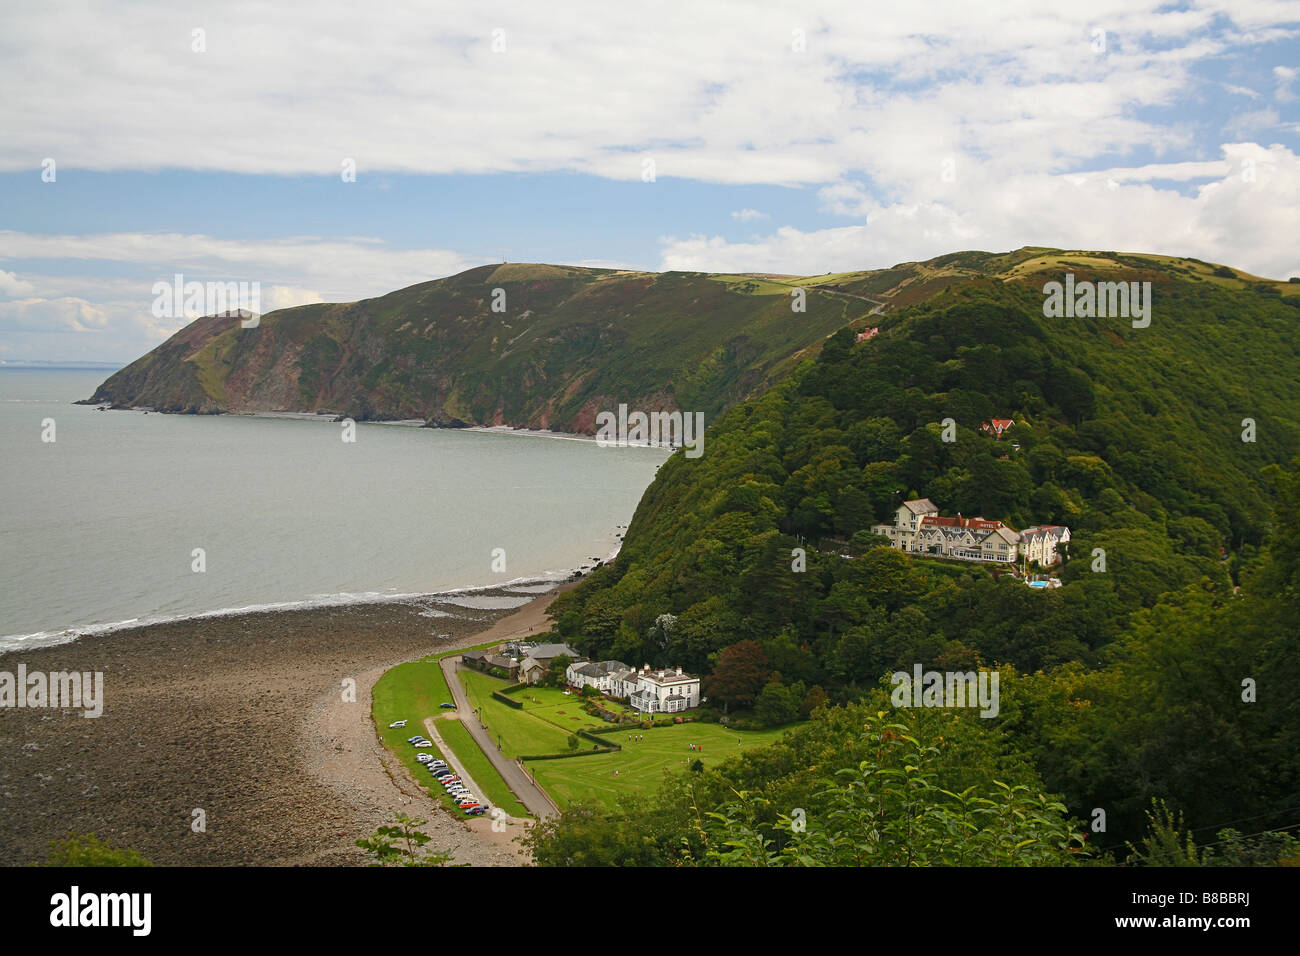 The imposing hillside location of The Tors Hotel at Lynmouth, North Devon, England, UK Stock Photo